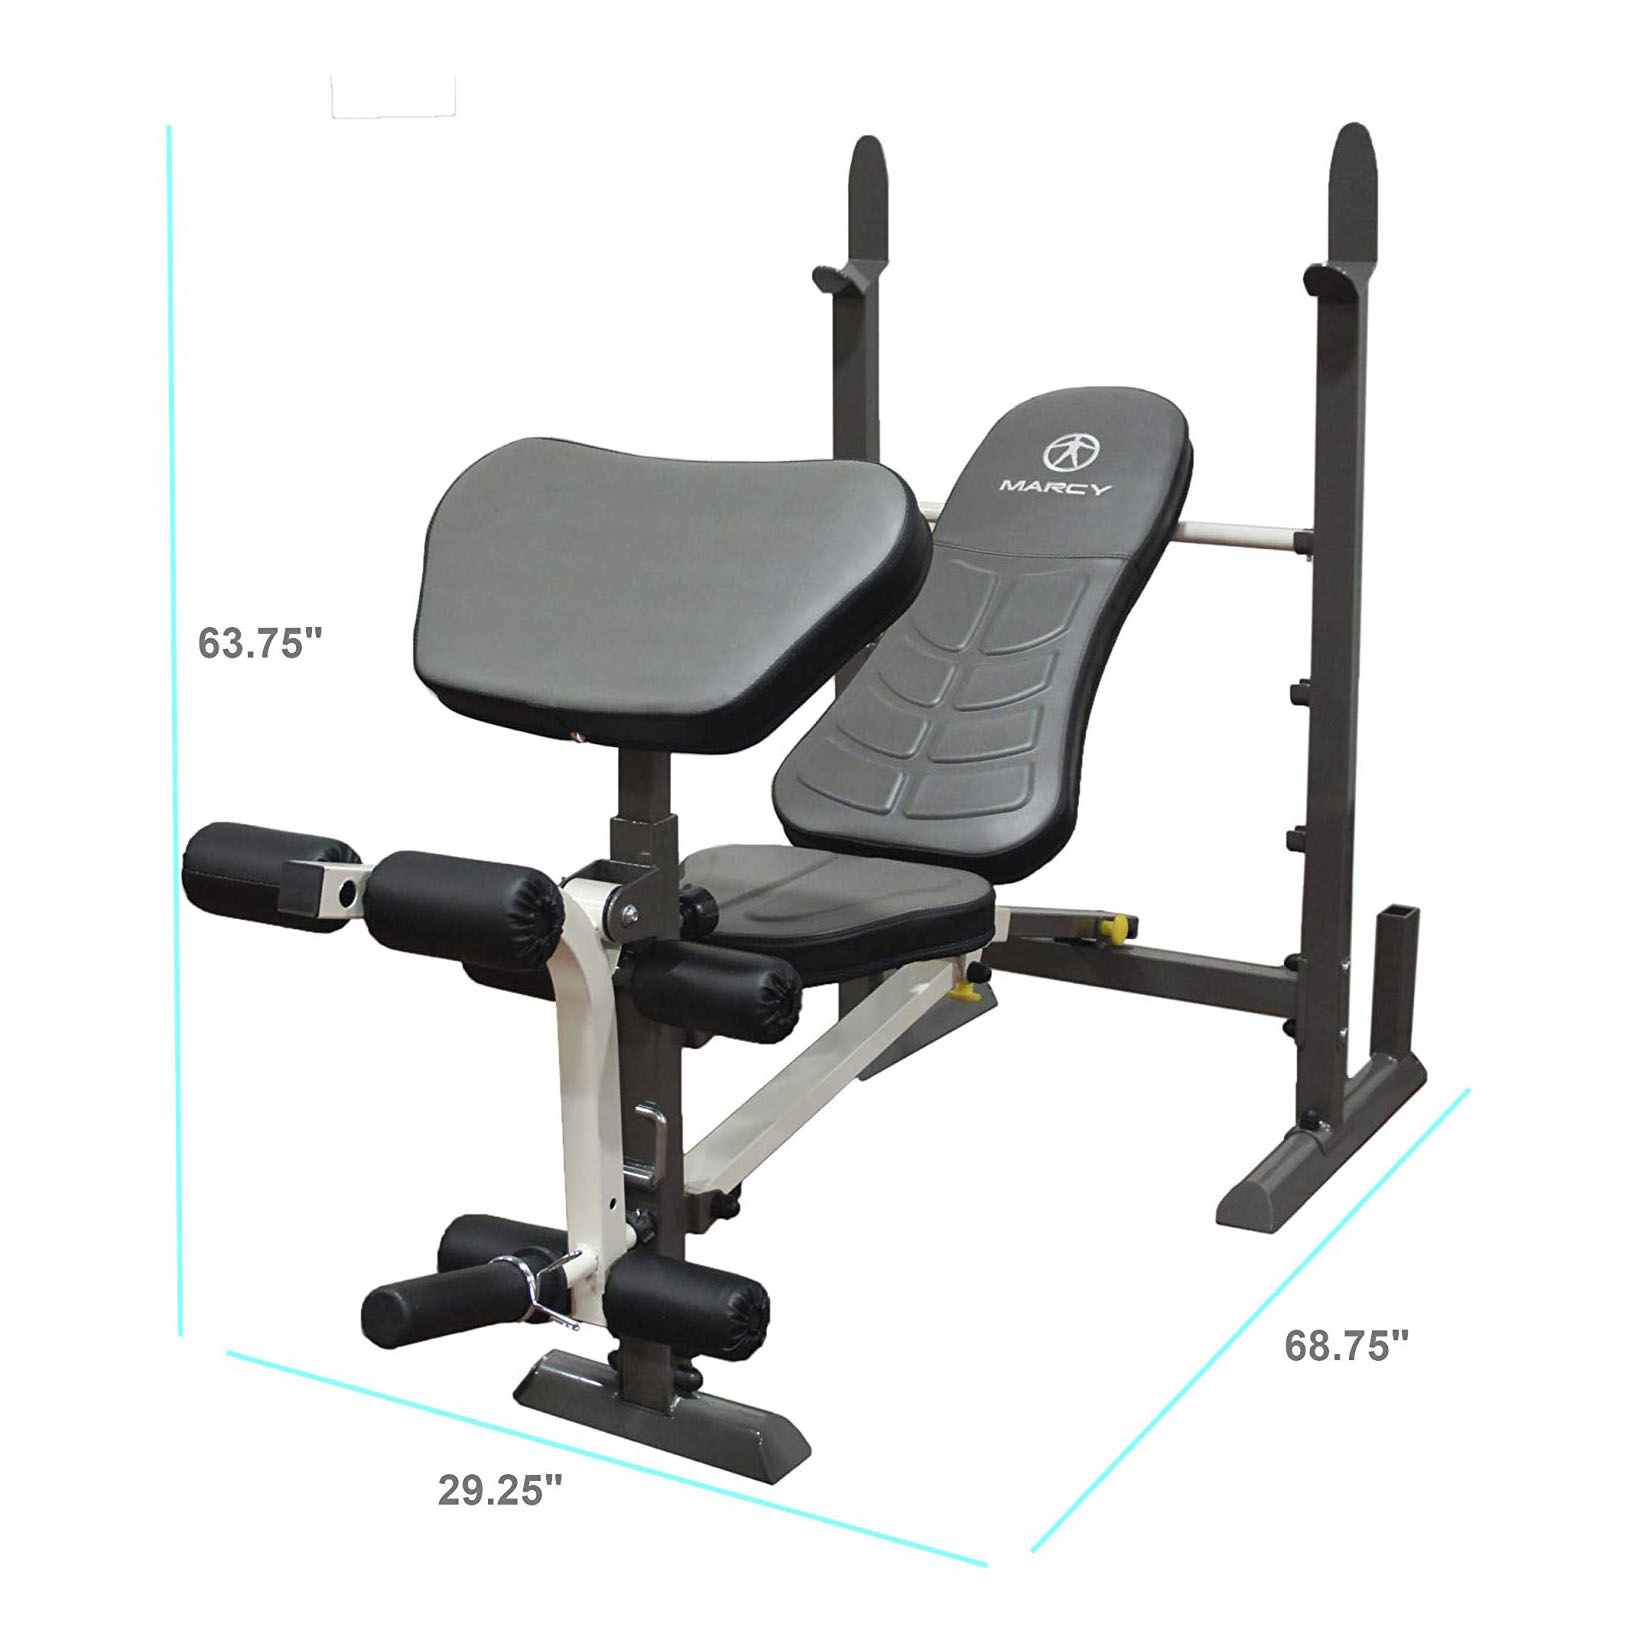 Marcy Foldable Standard Weight Benches MWB-20100 - image 3 of 3